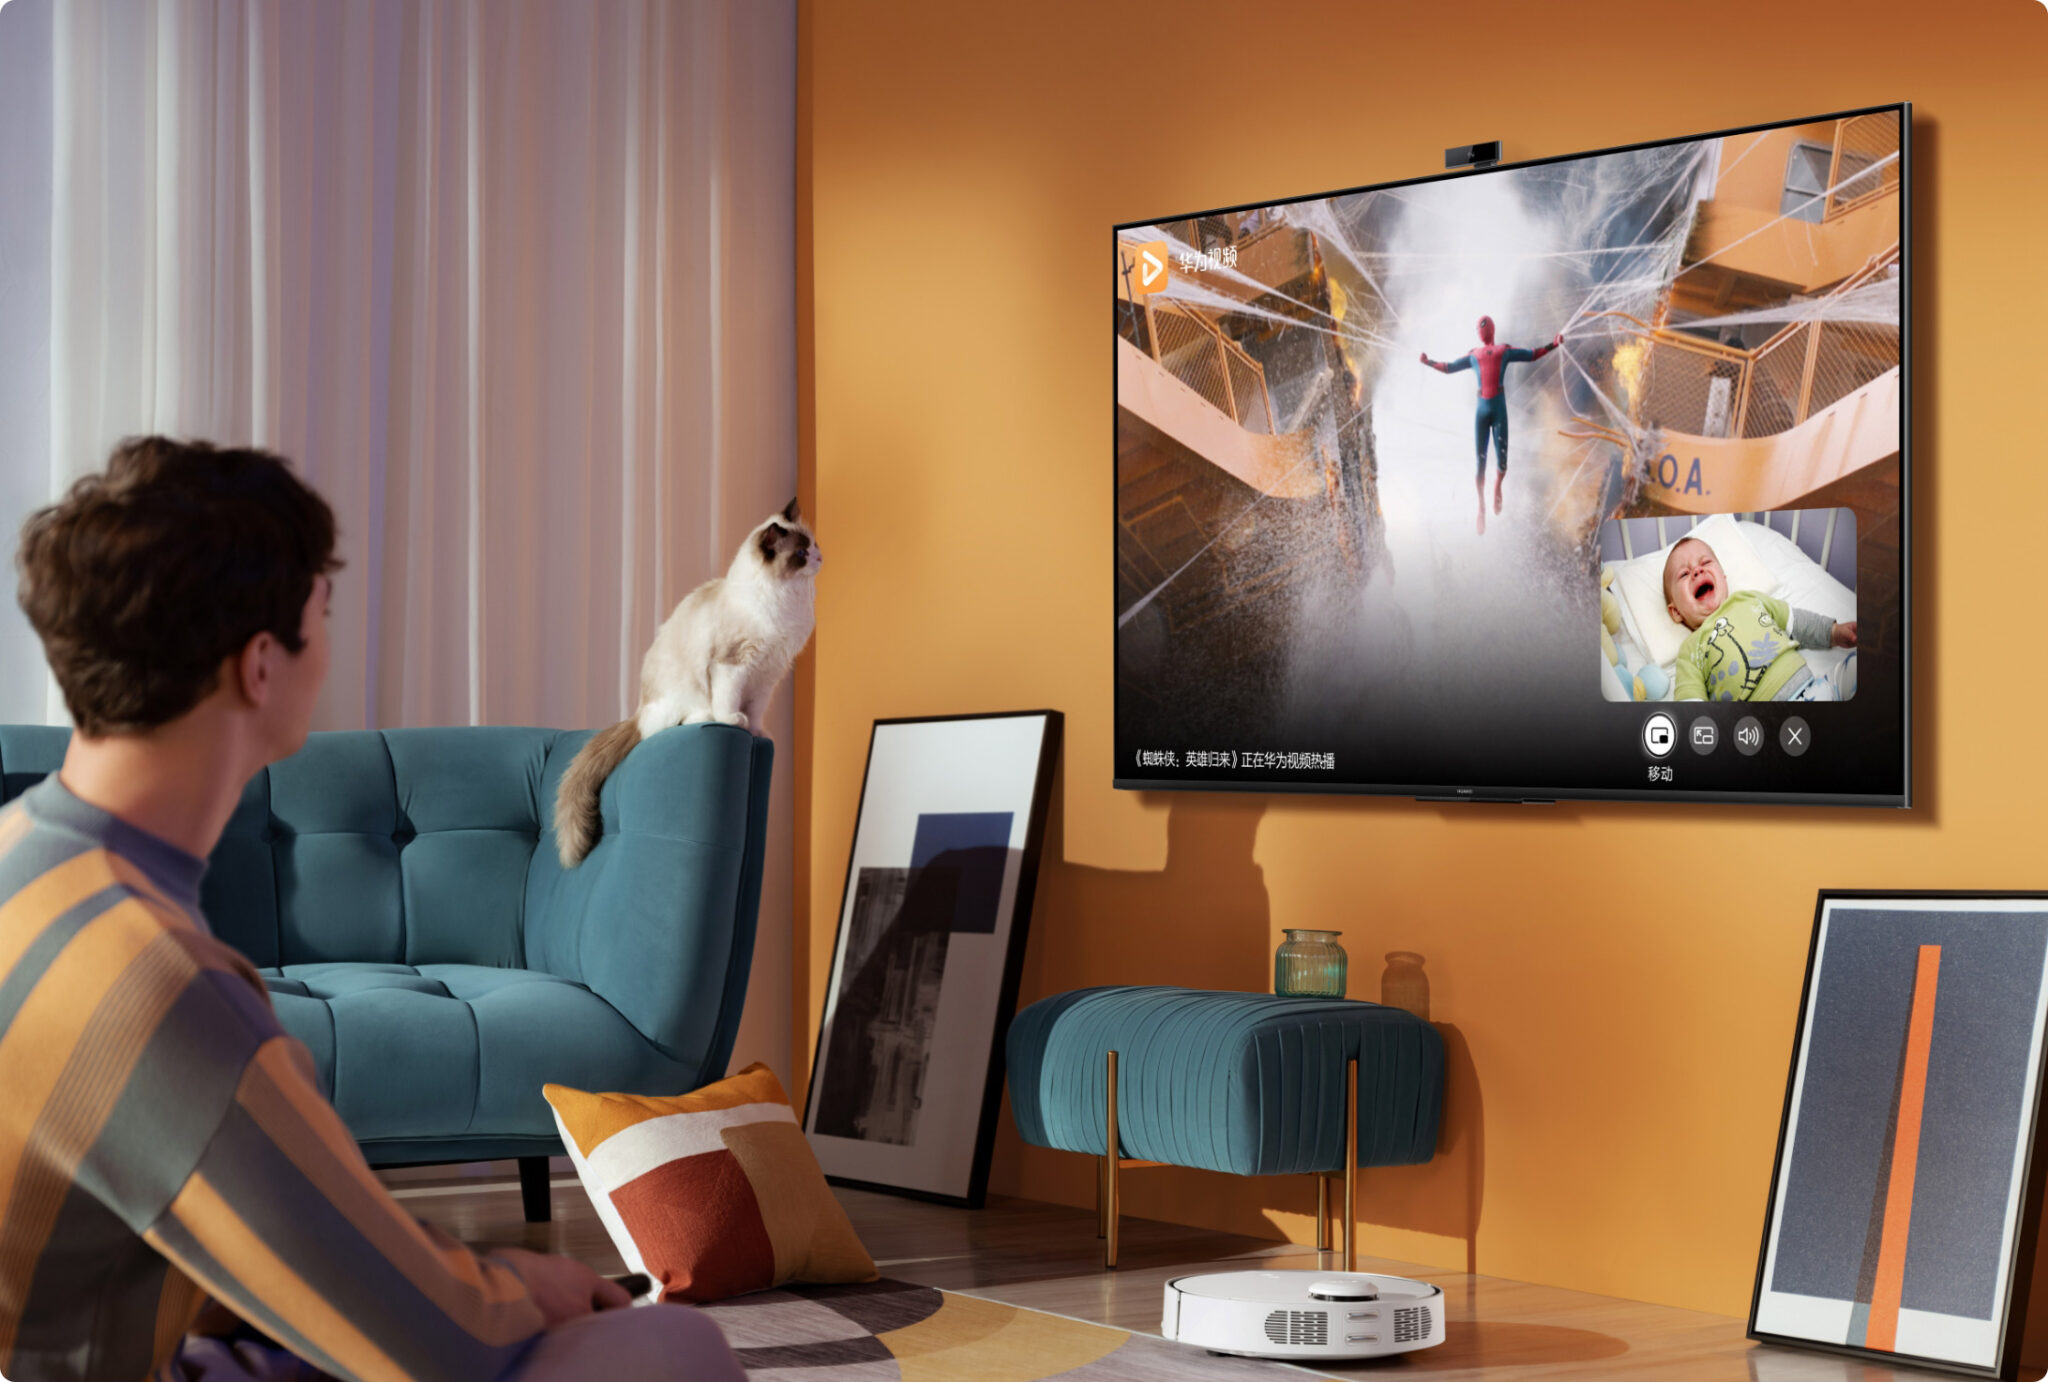 Huawei launched the Smart Screen S series and smart home system S 55